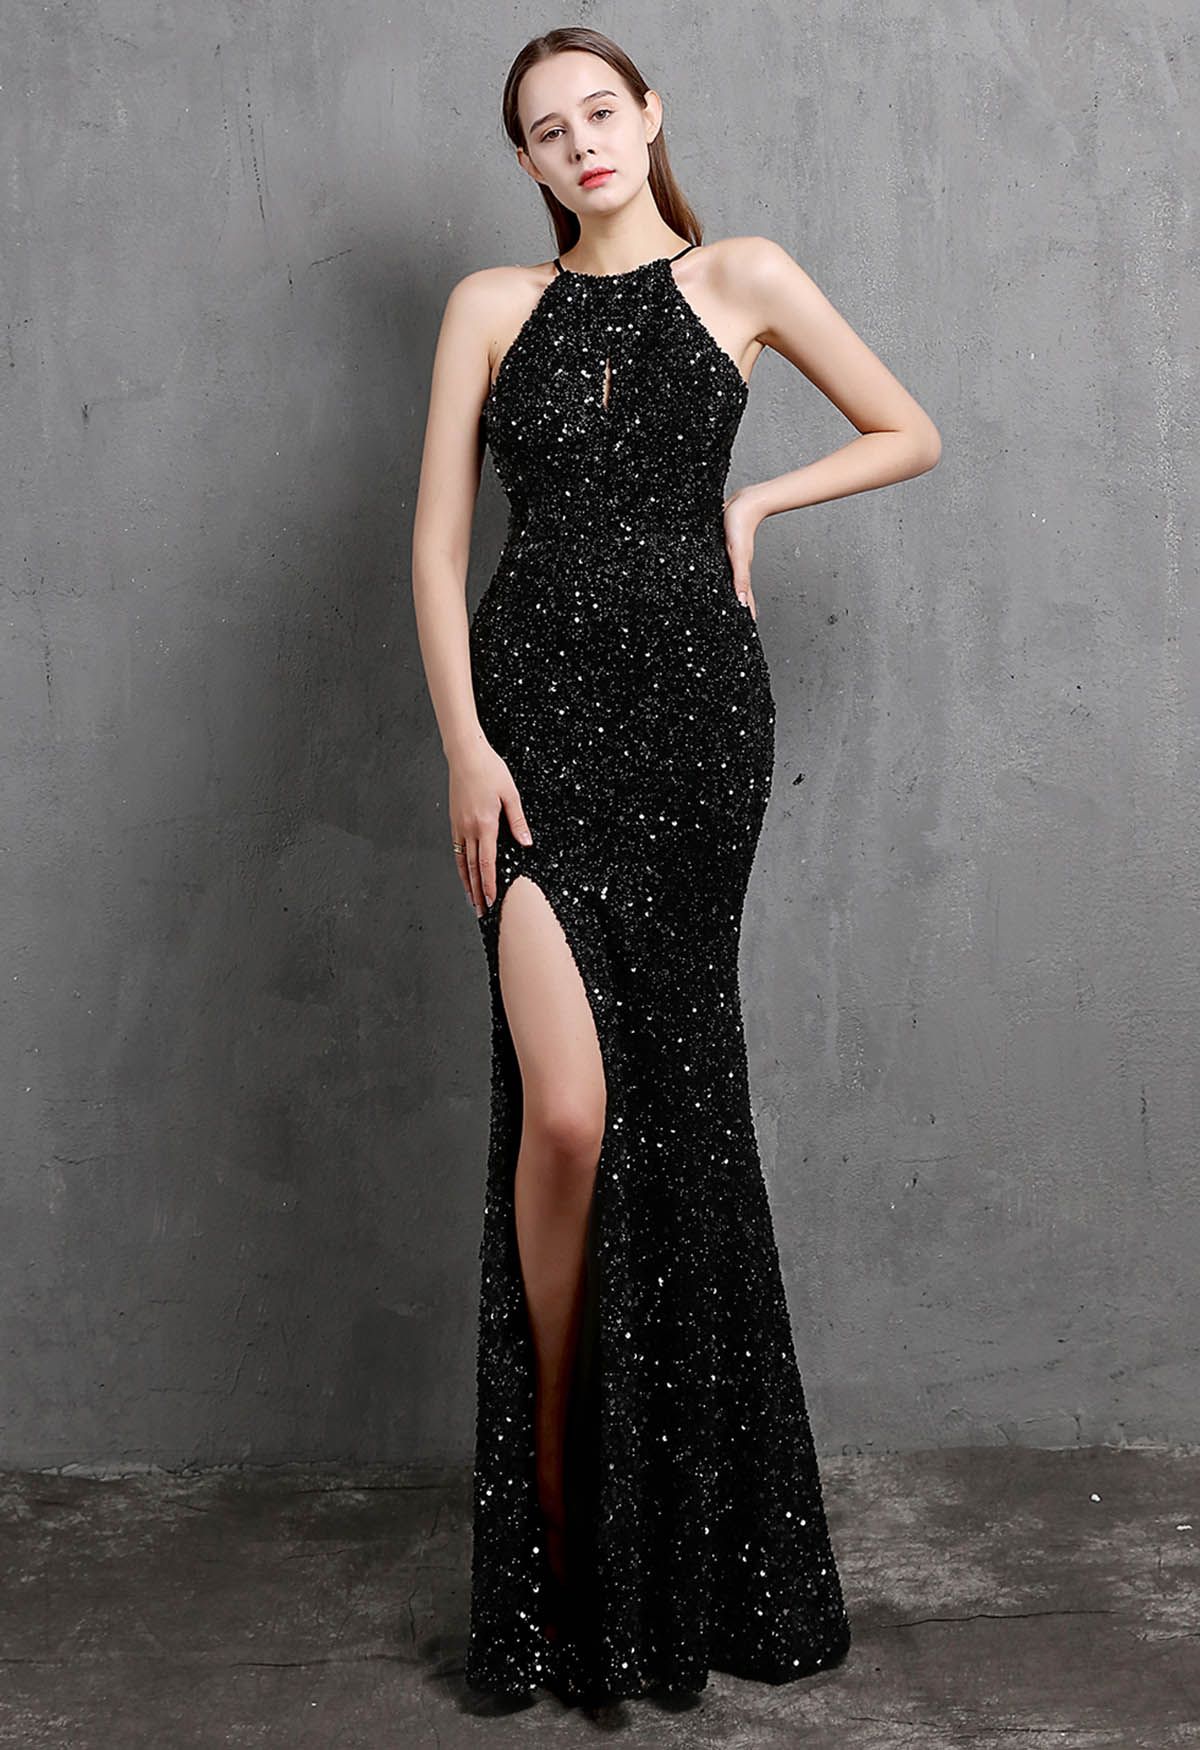 Halter Neck Cutout Sequined Slit Mermaid Gown in Black